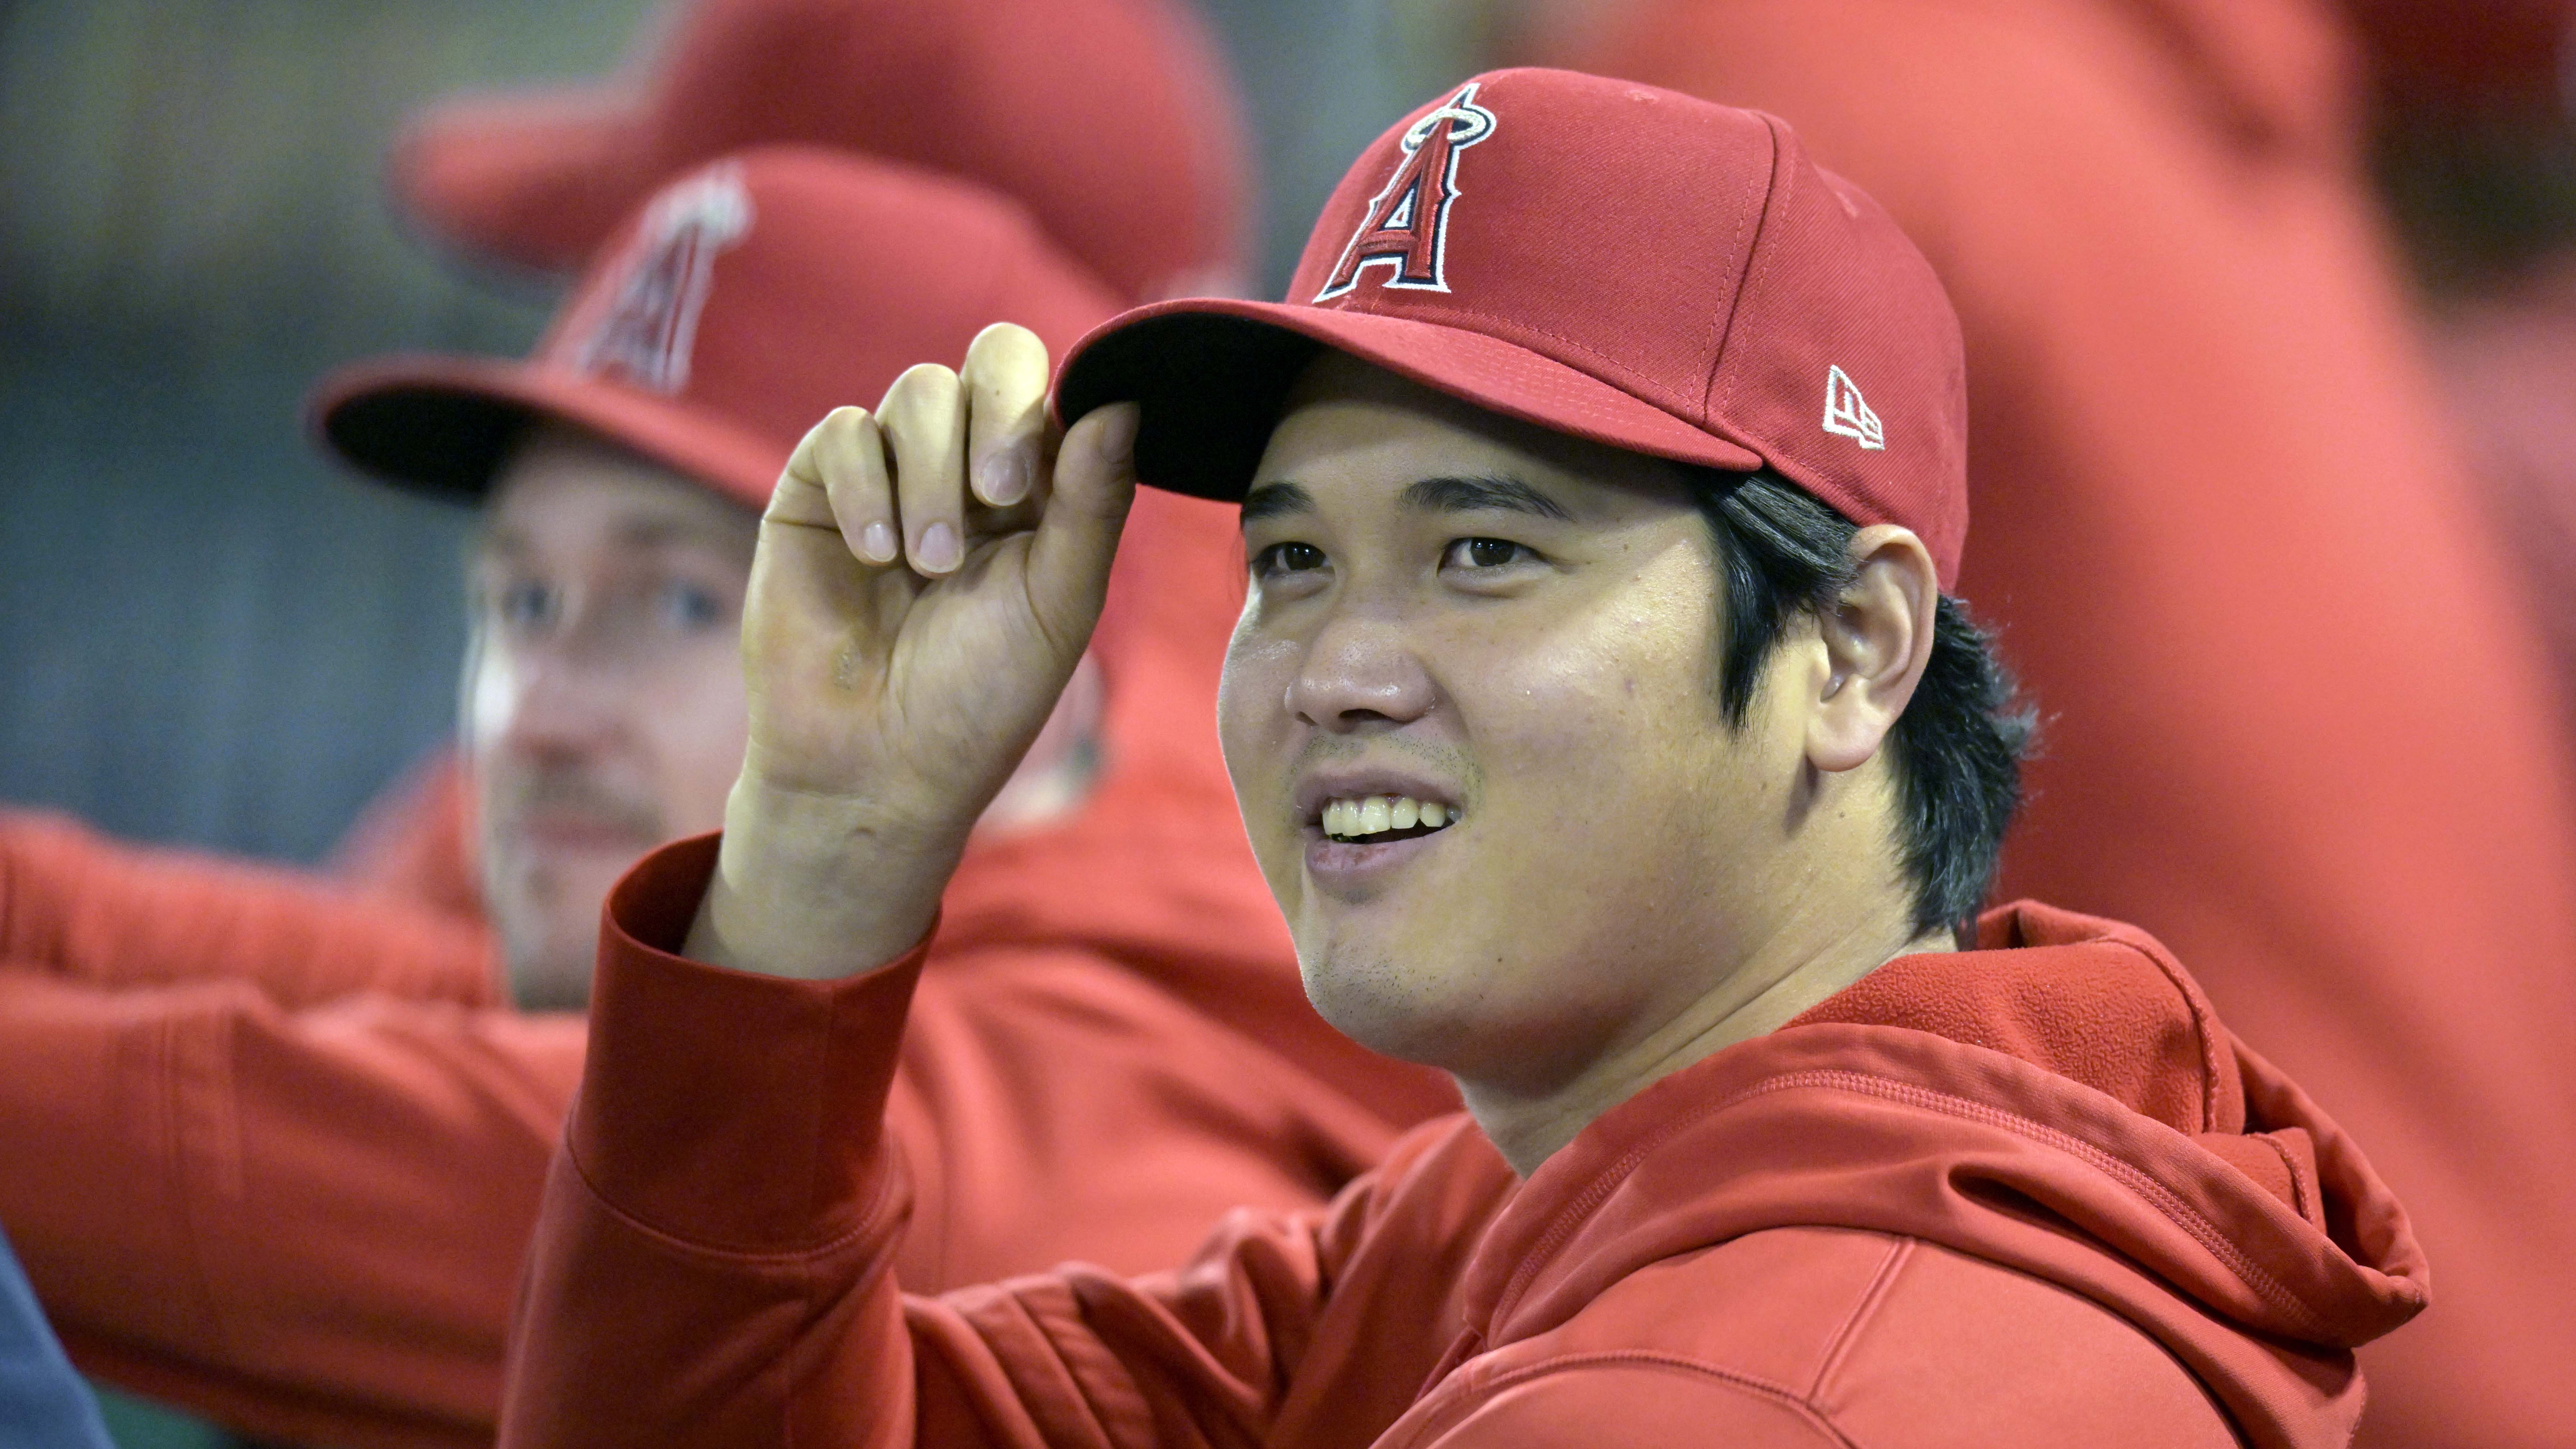 Shohei Ohtani to sign with the Angels - NBC Sports